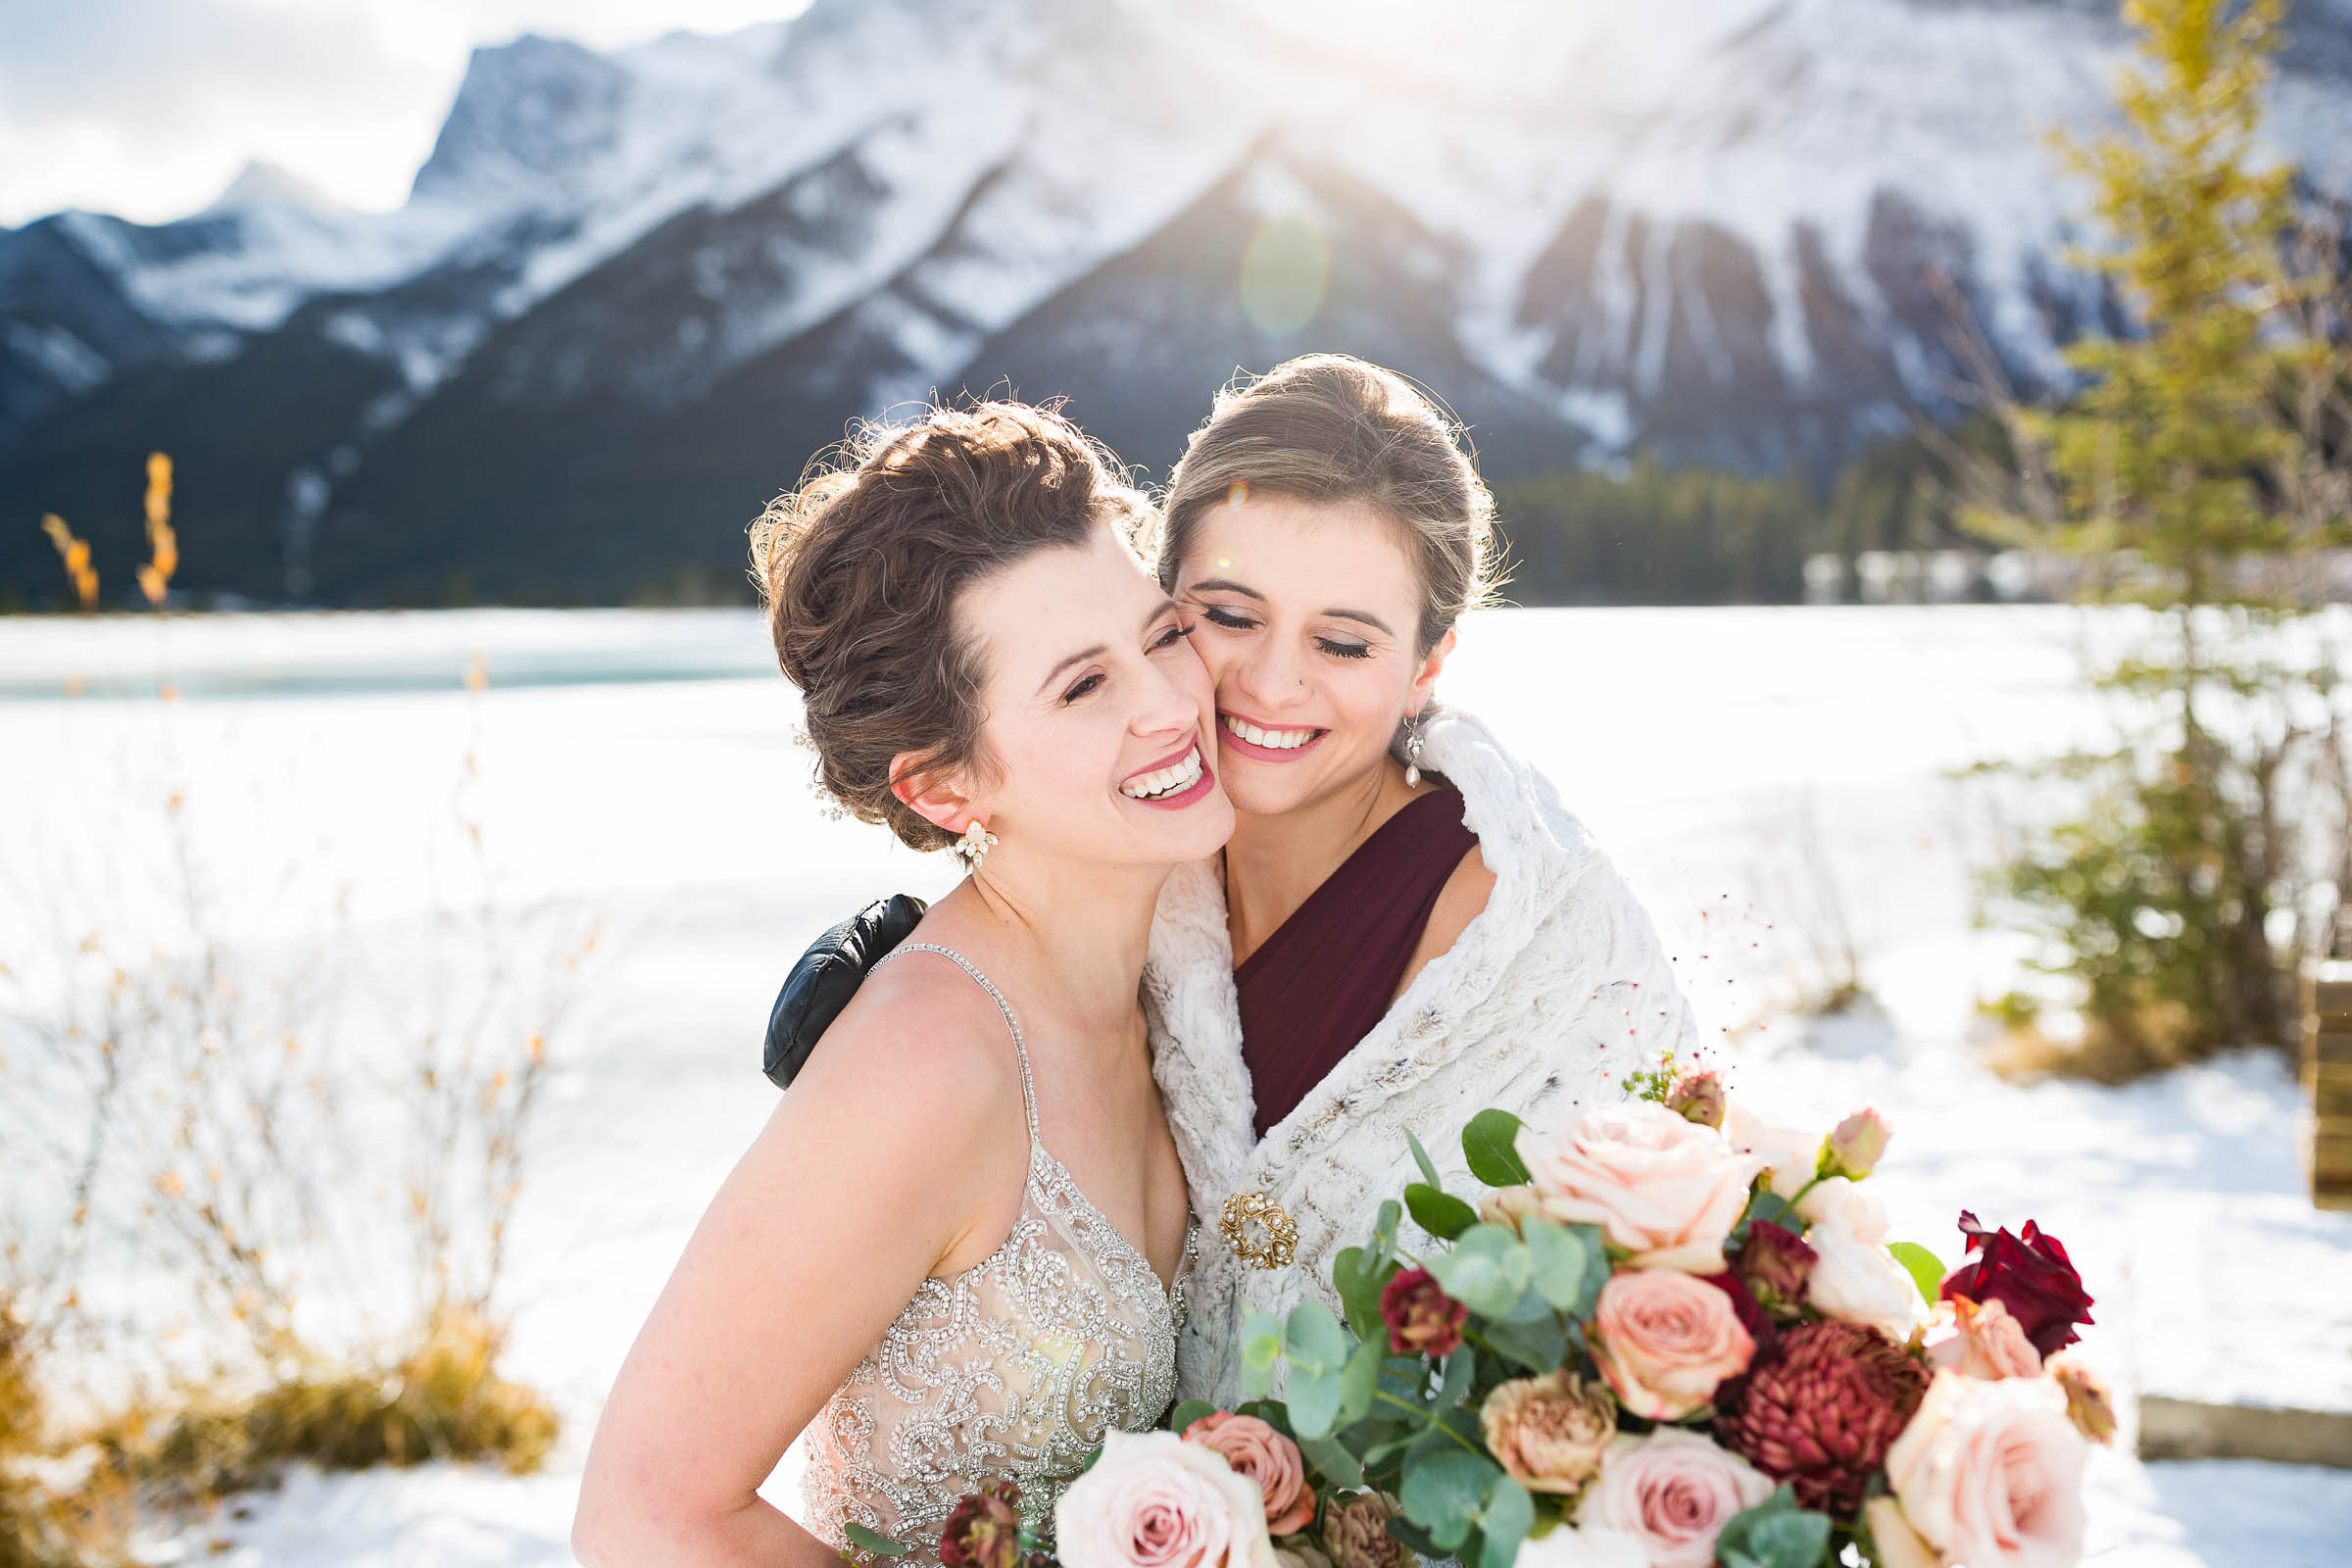 Bride and maid of honour laughing and hugging each other holding wedding bouquets of red, blush and white roses